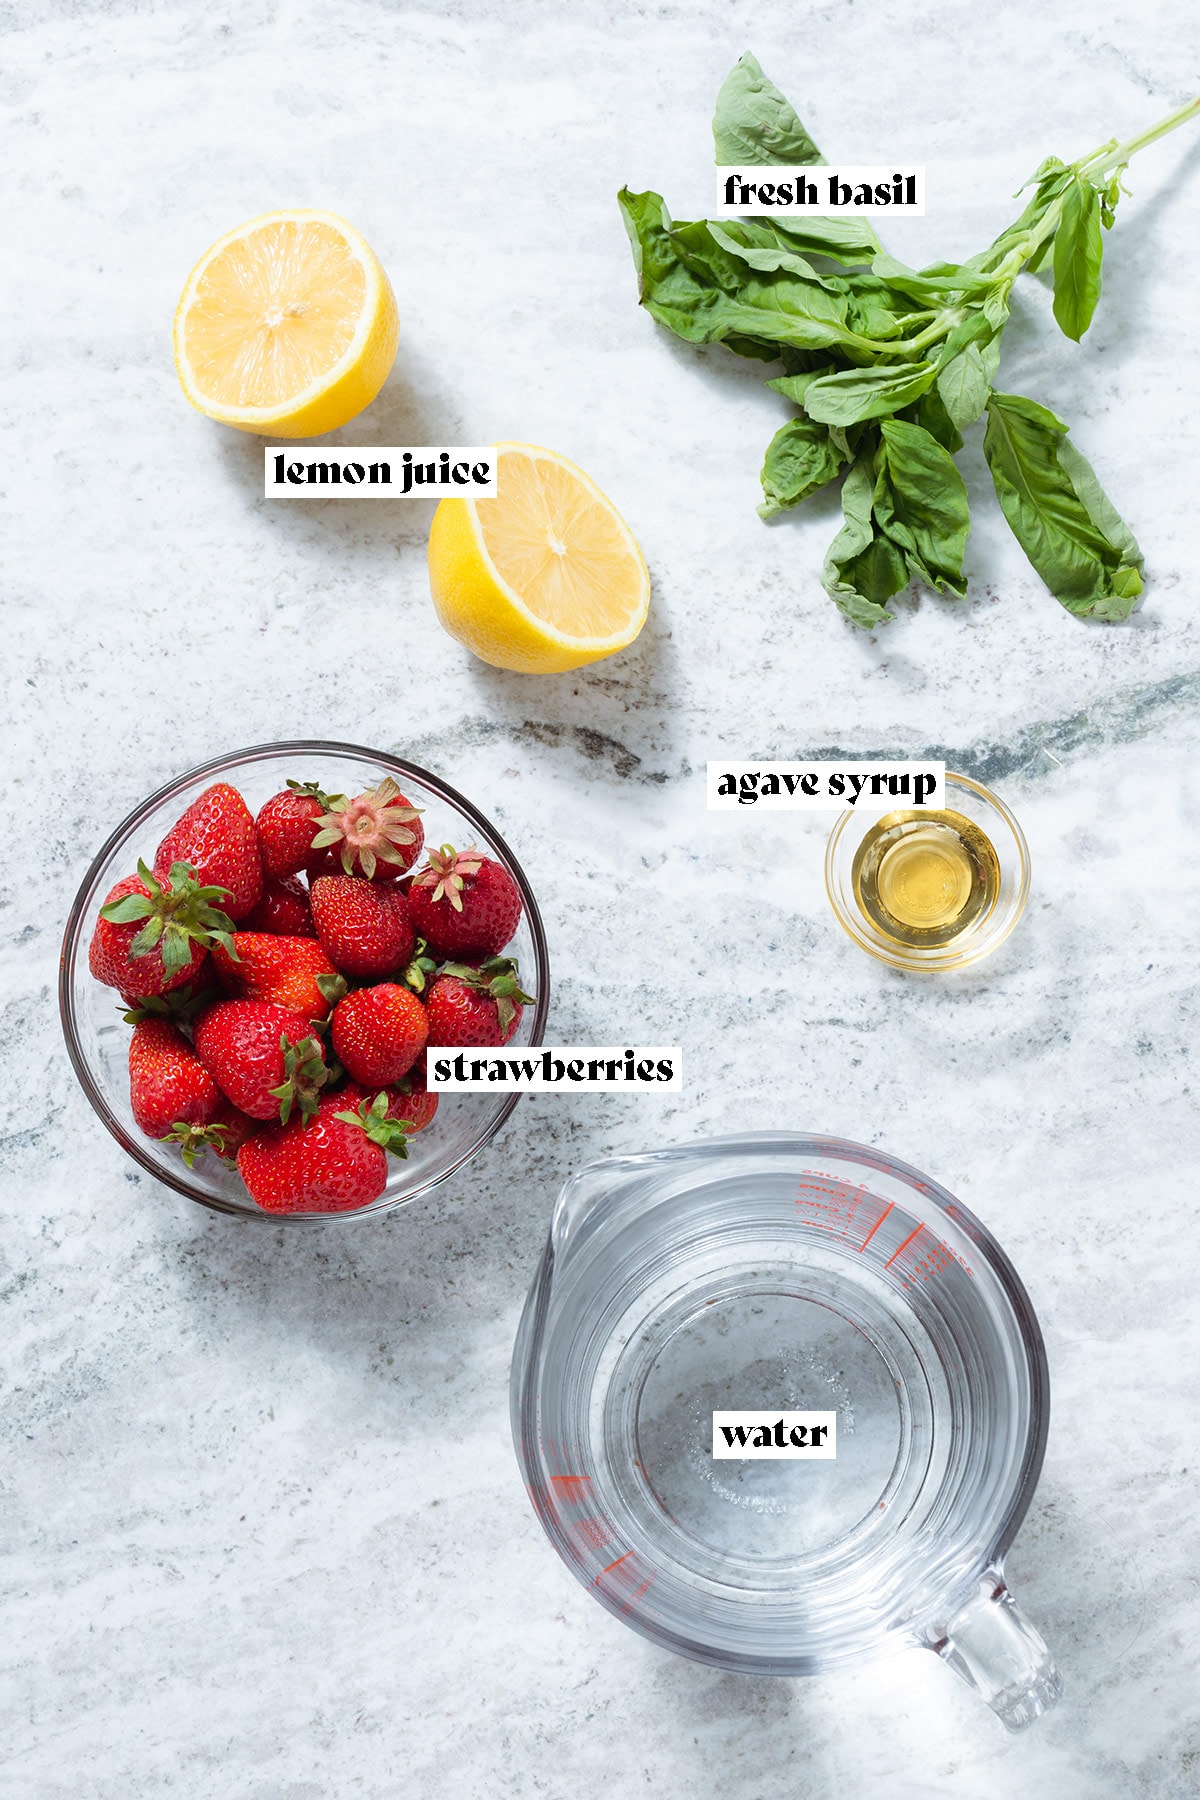 Ingredients like strawberries, basil, lemon, and water on a grey stone background with text overlay.